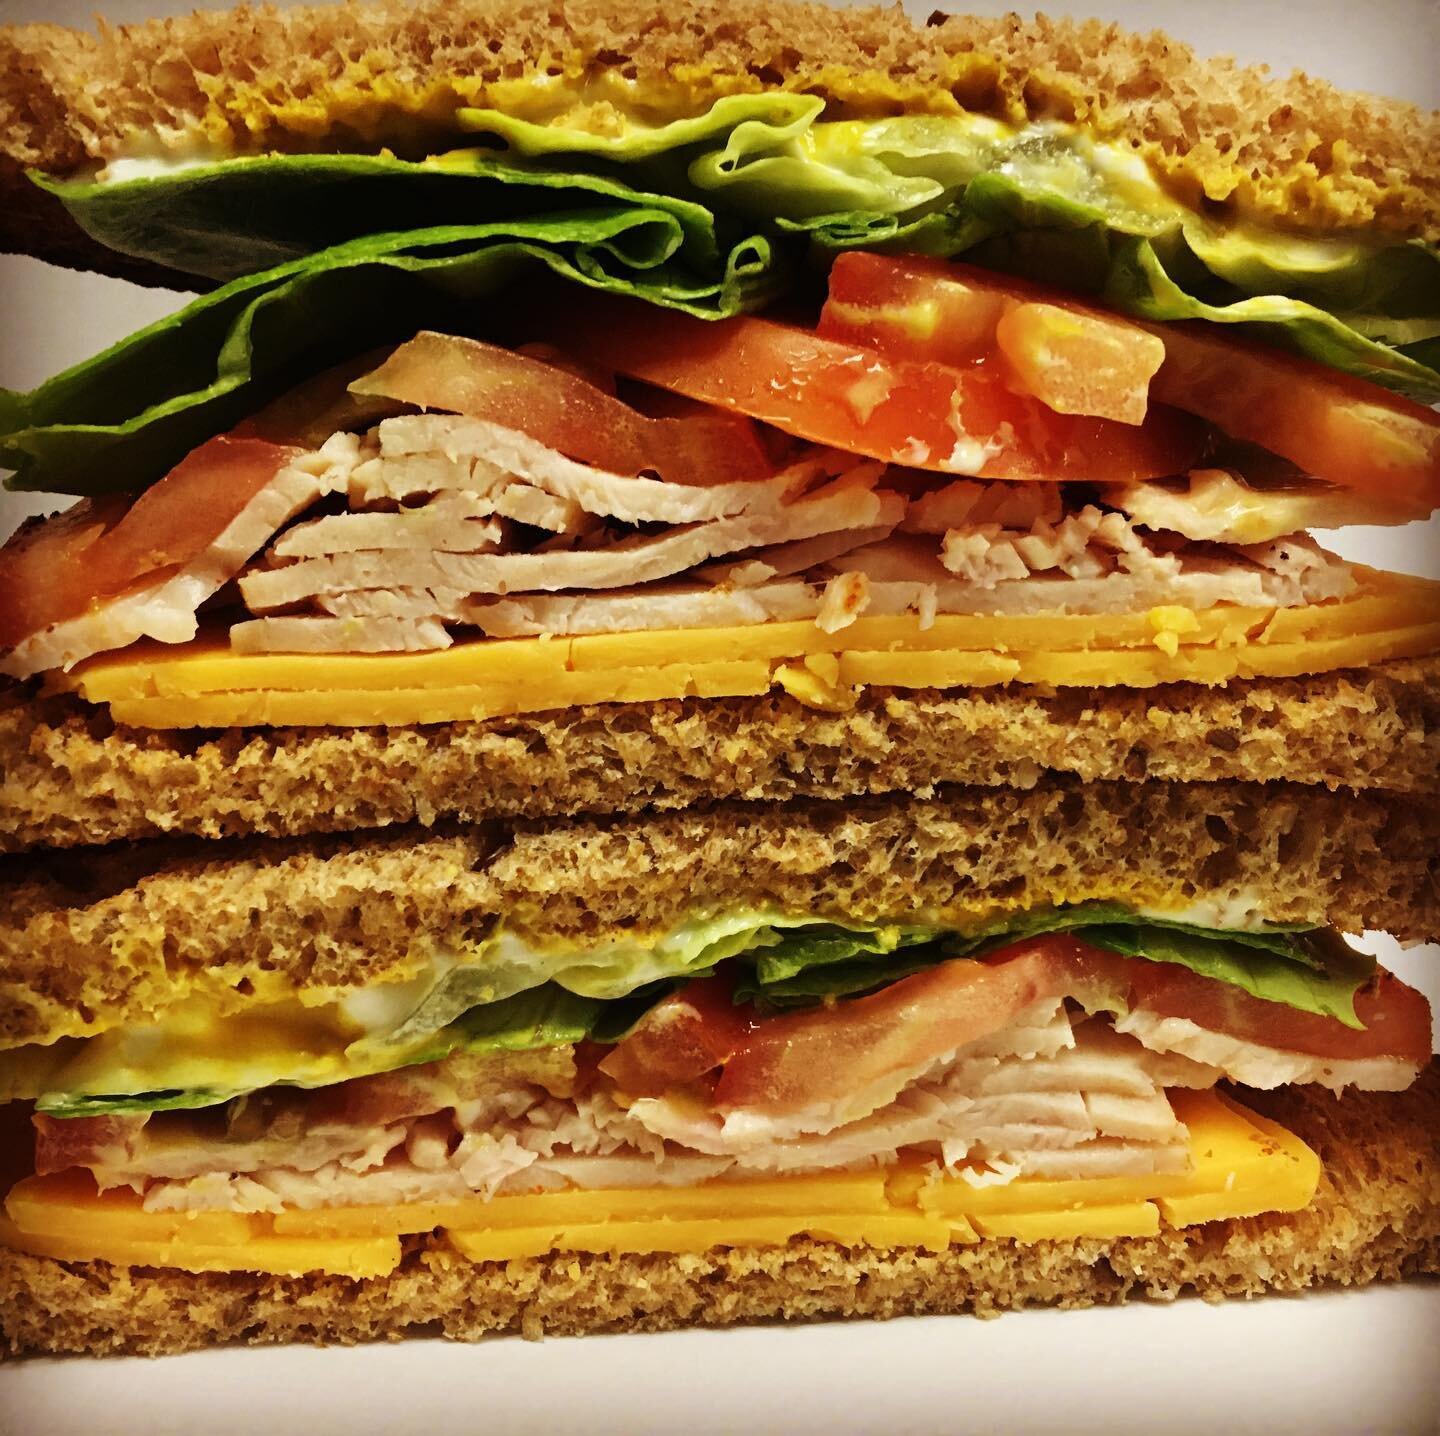 Sometimes a simple sandwich is the best sandwich!  Try our Lunchbox and choose from any of our regular or gluten-free breads, then add chicken, ham or turkey and top off with cheese, lettuce, tomato, mustard and mayo.  Simple and satisfying! #sandwic